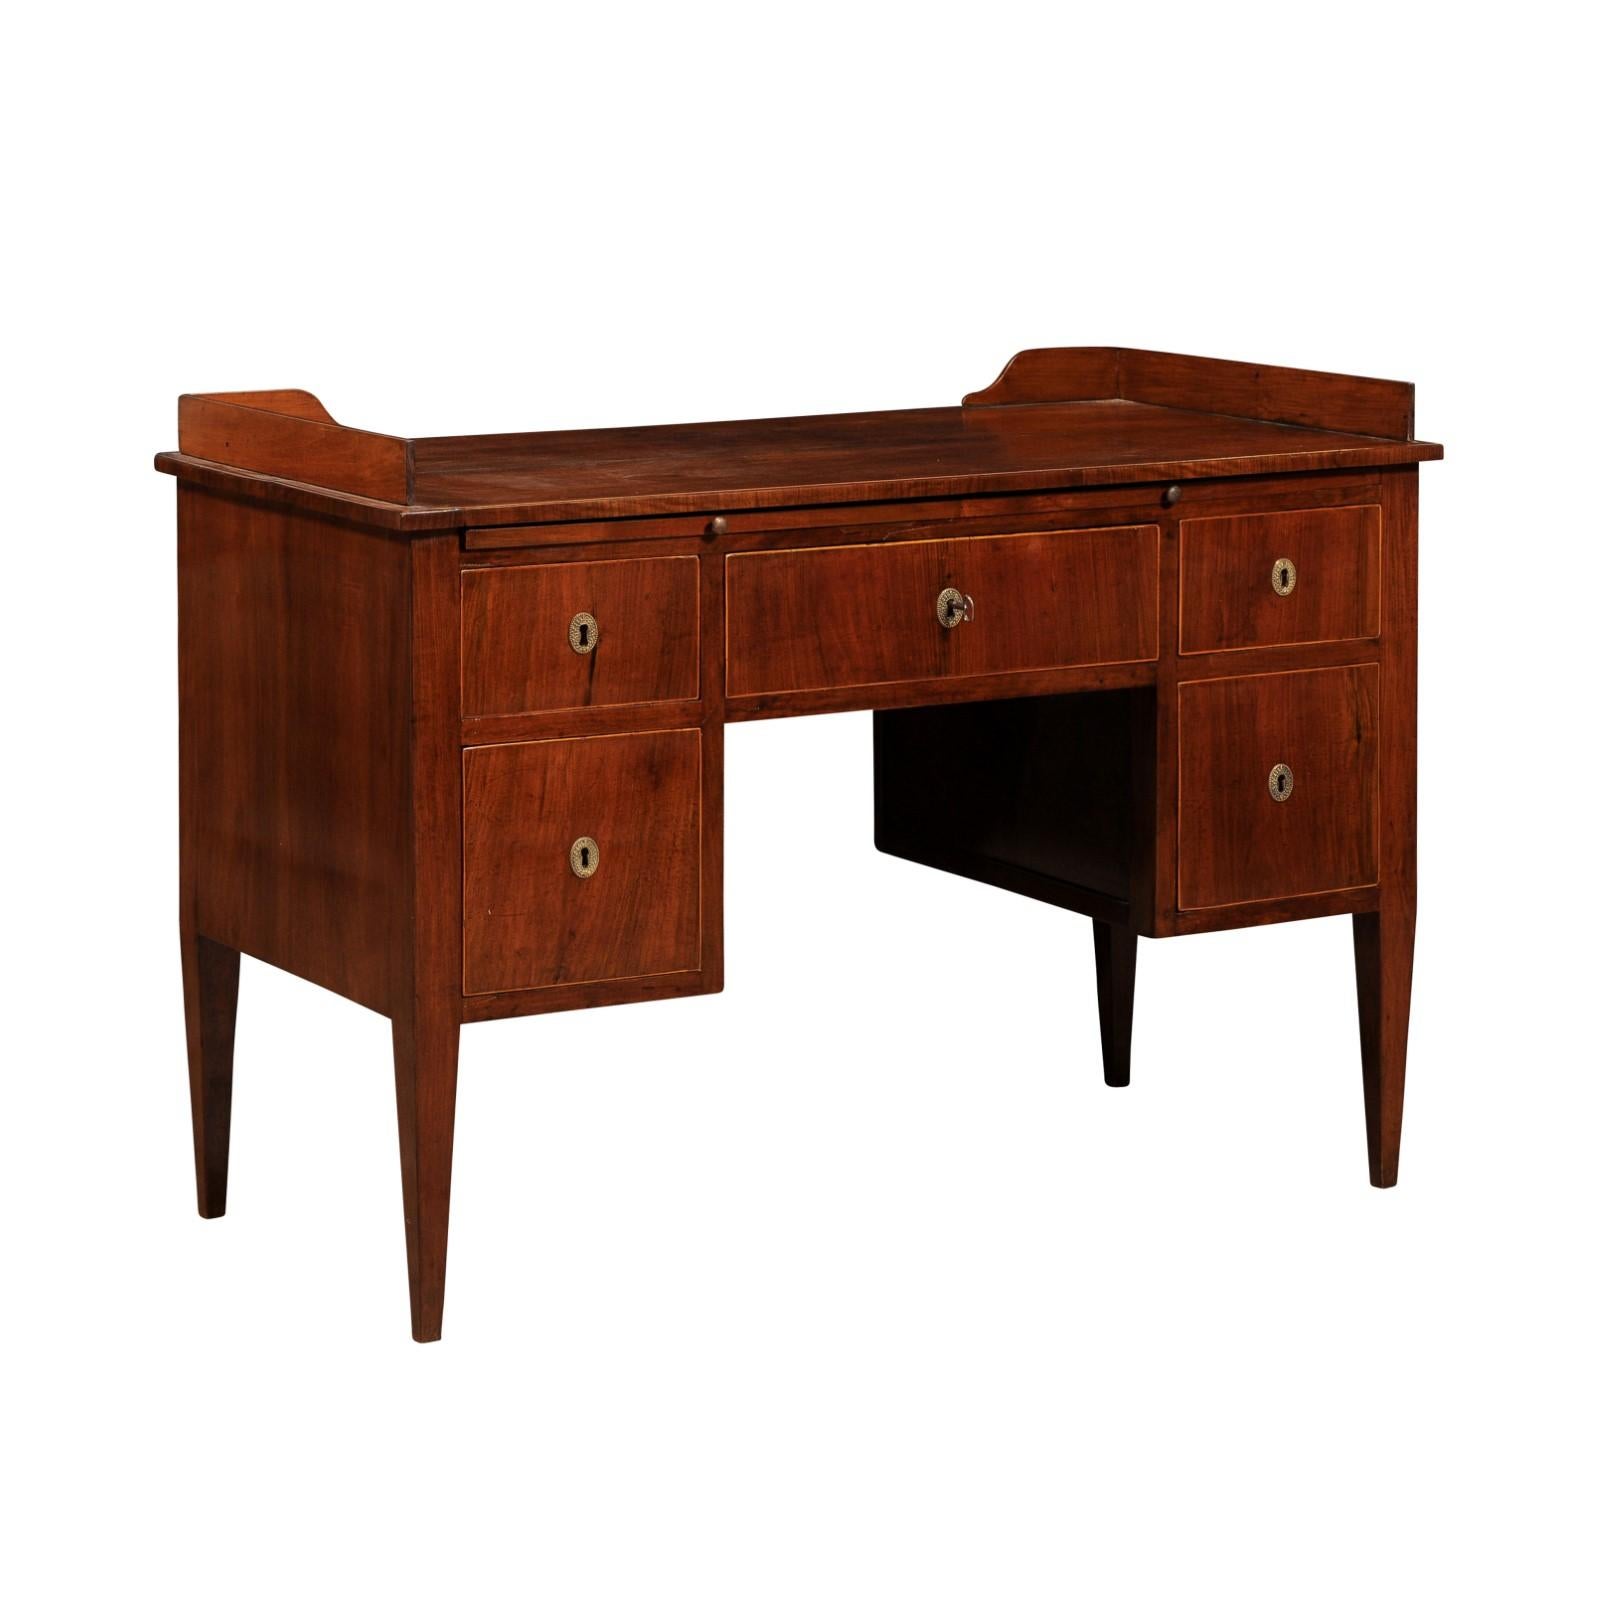 An Italian walnut and mahogany desk from circa 1820 with dark brown leather pull-out drawer, five drawers and thin banding around the drawers. This Italian walnut and mahogany desk from circa 1820 is a fine example of early 19th-century